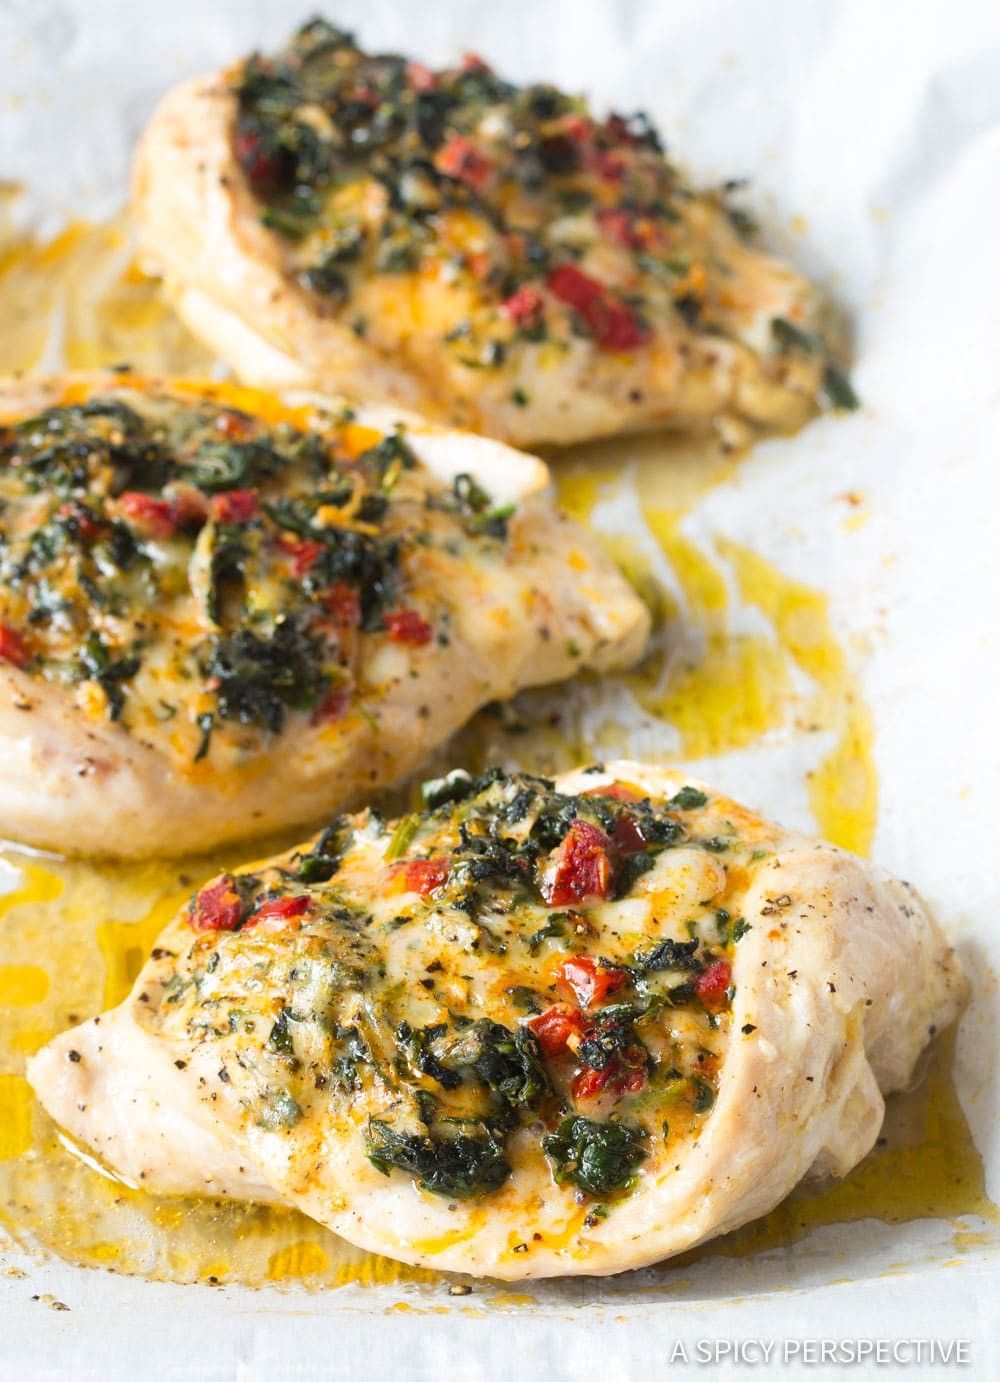 Cajun Smothered Chicken Breasts - Pink Owl Kitchen